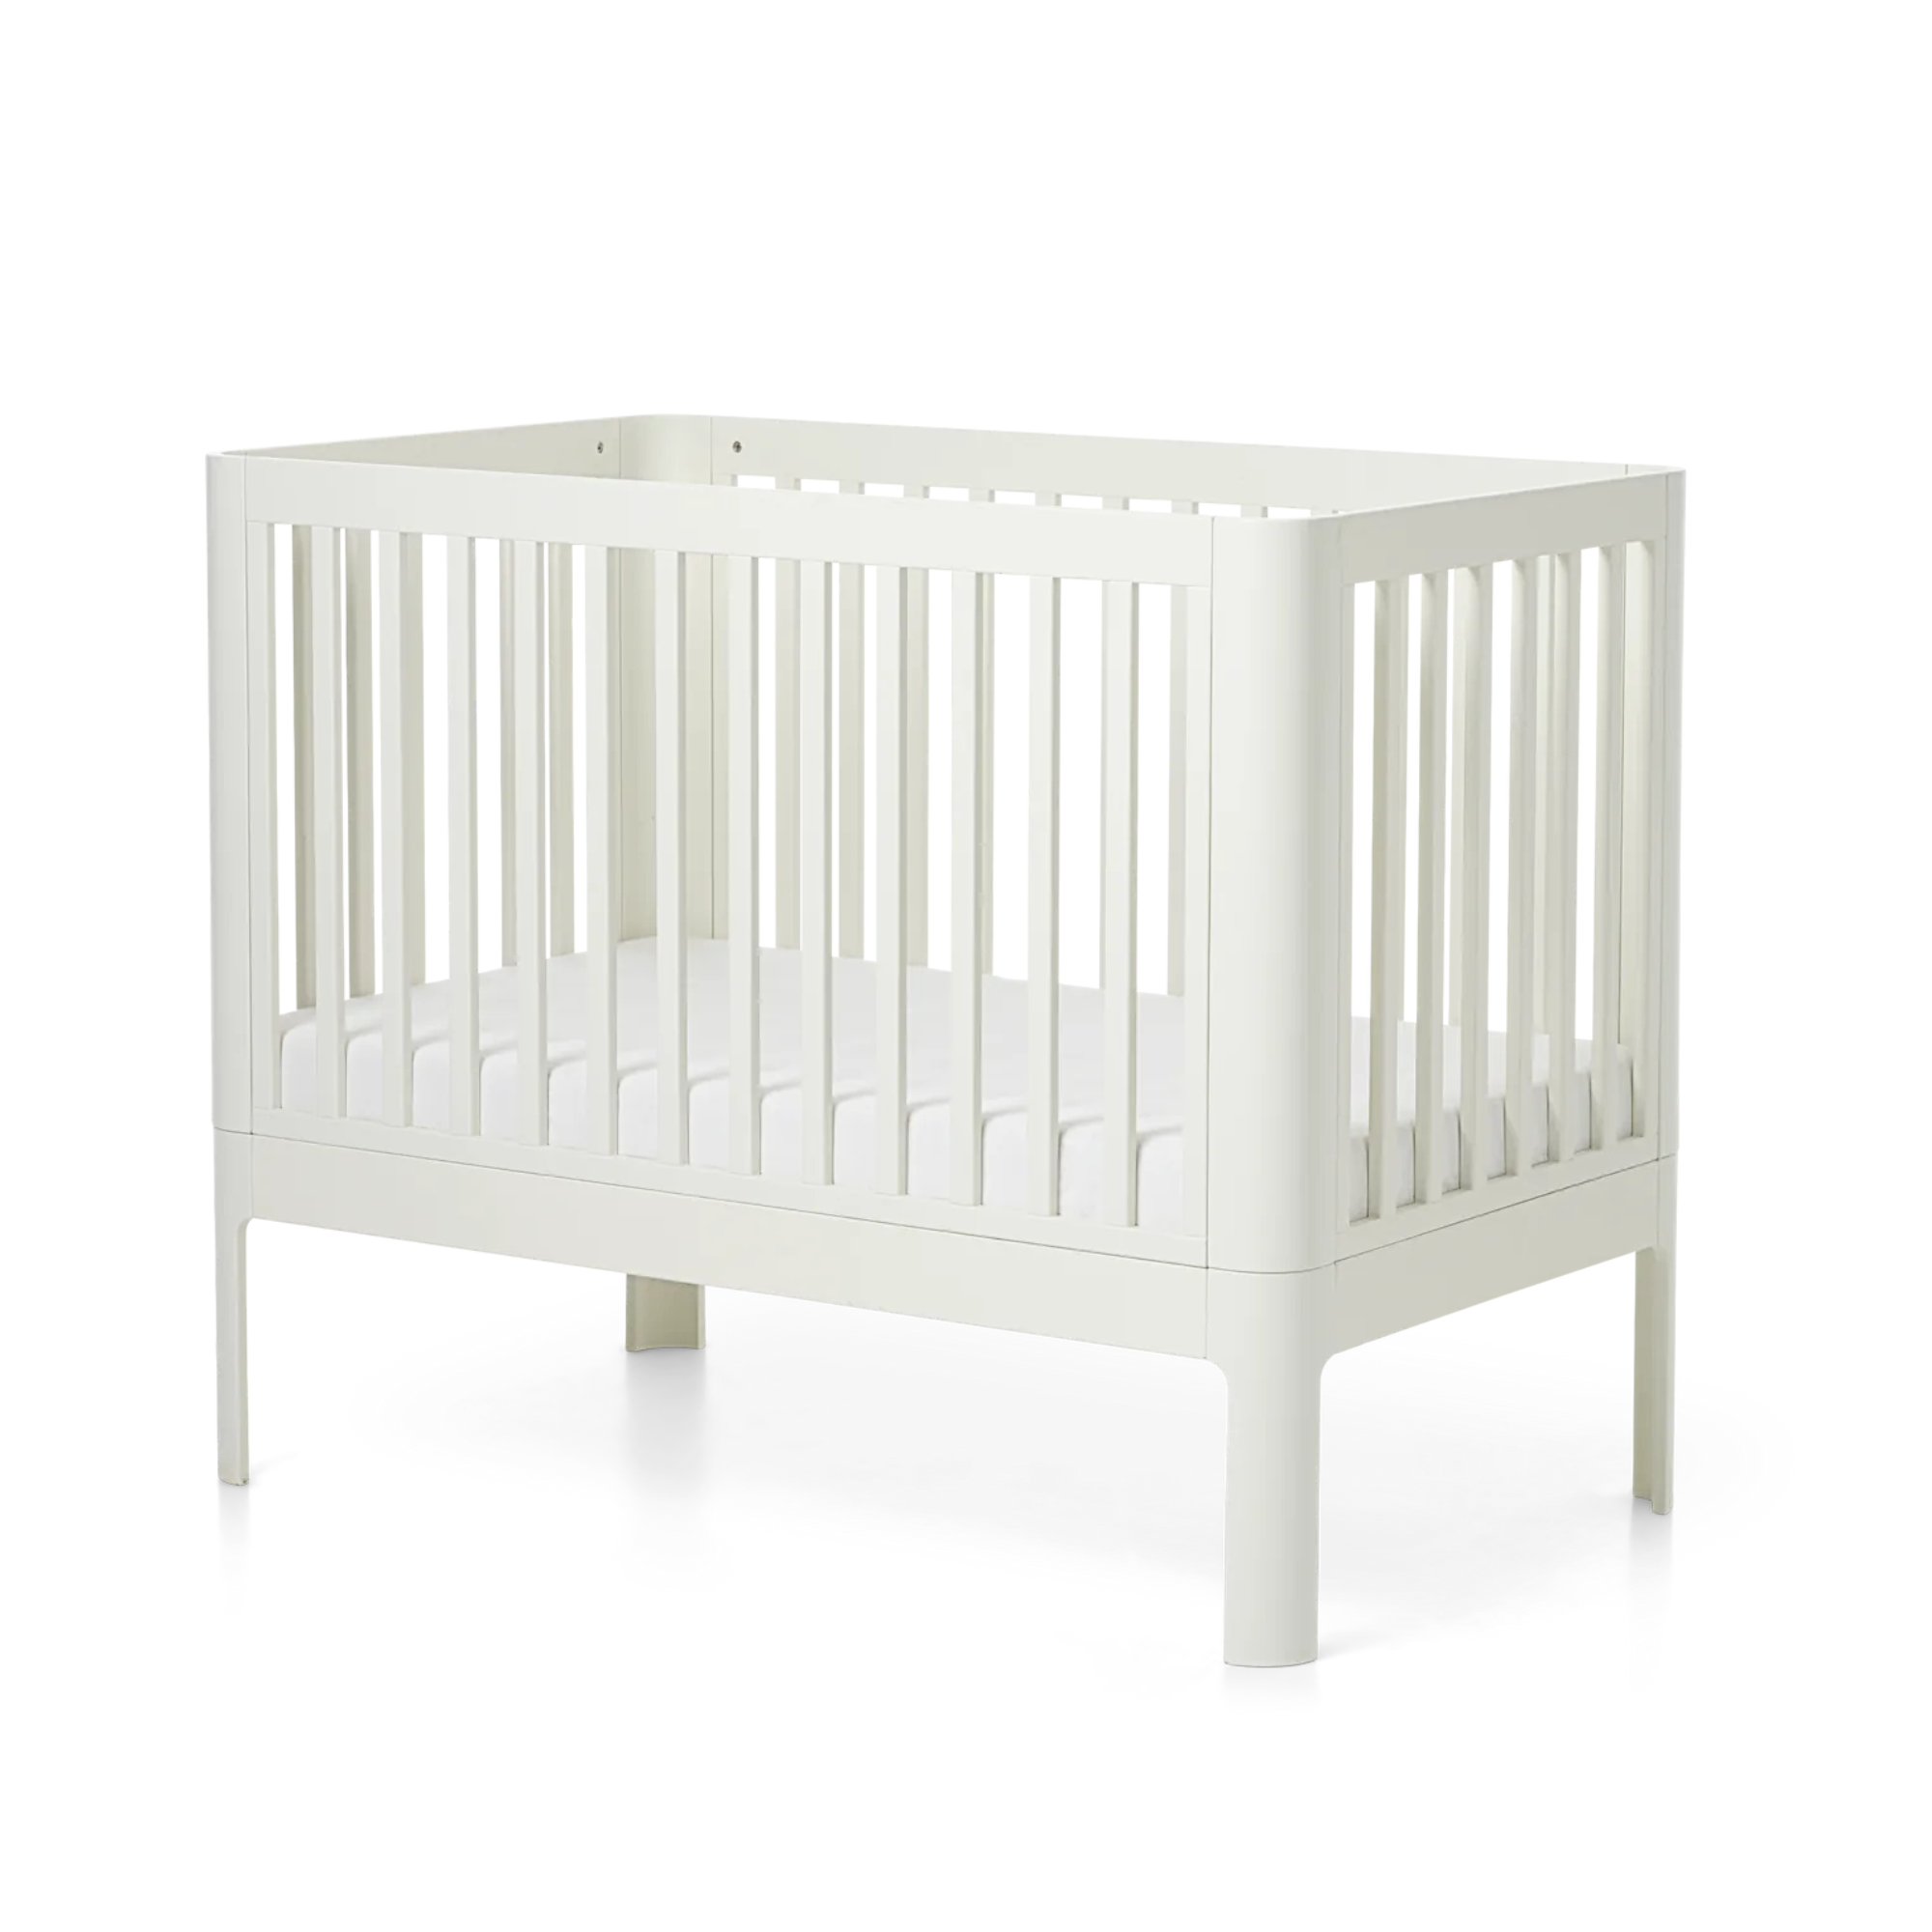 Baby bed - Various colors